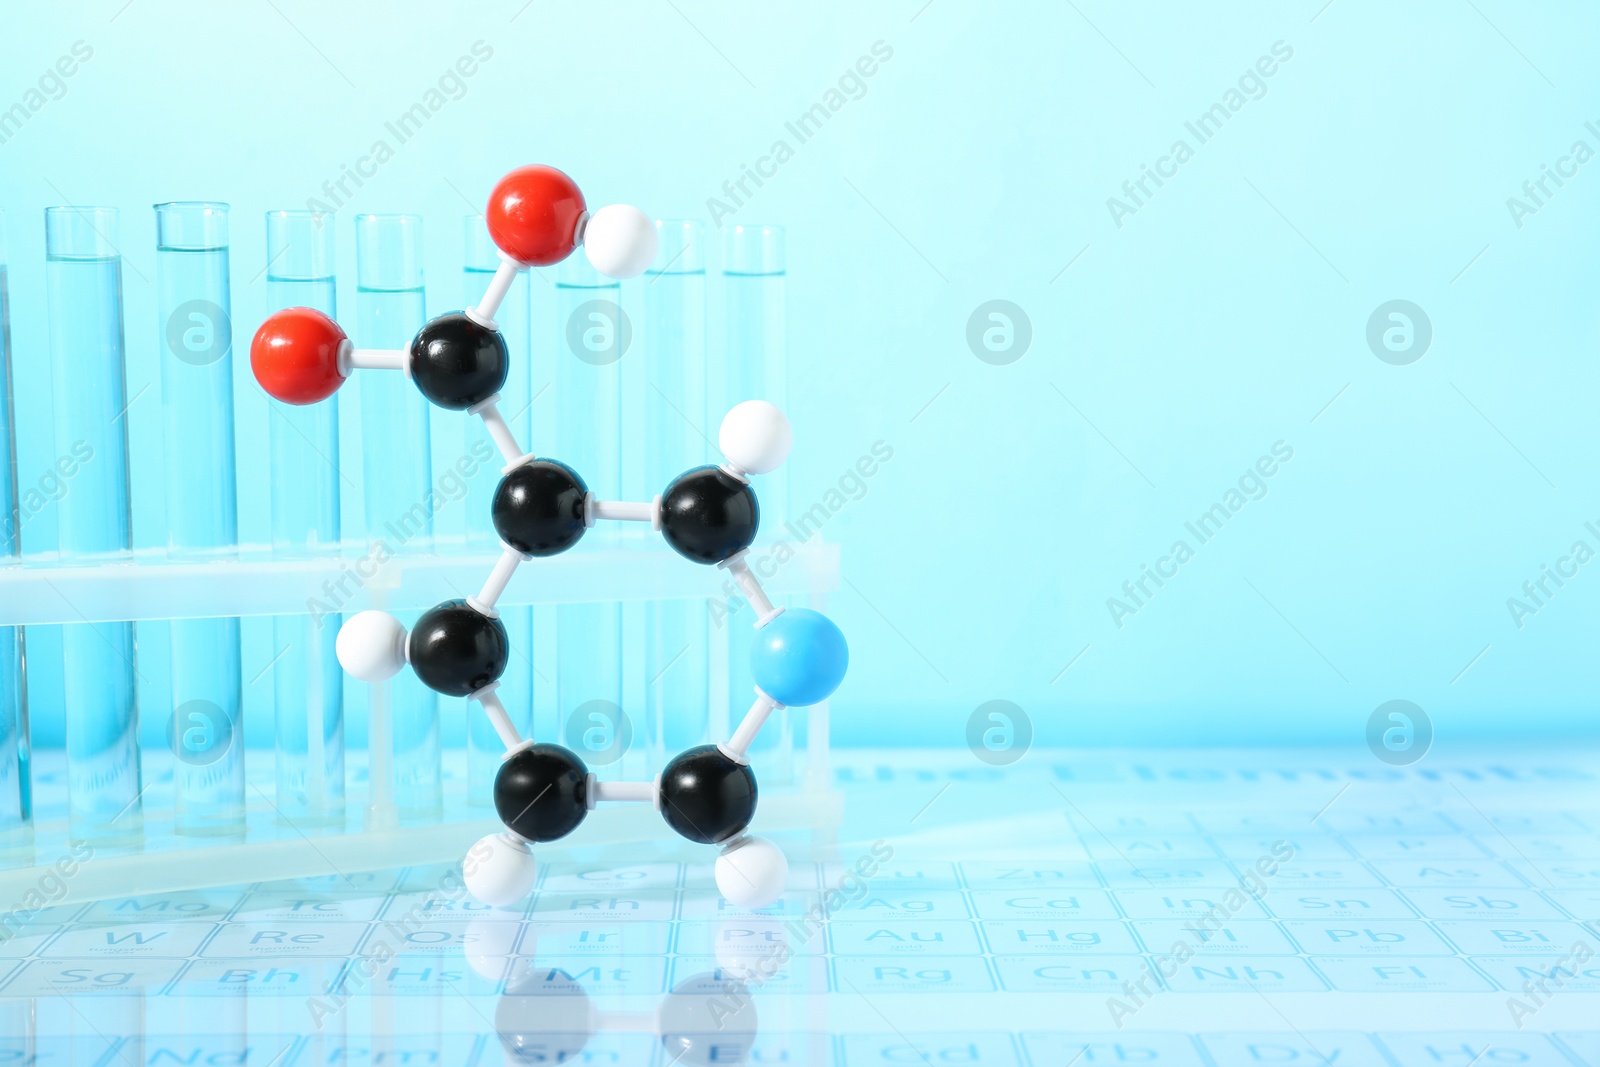 Photo of Molecular model and test tubes against light blue background, space for text